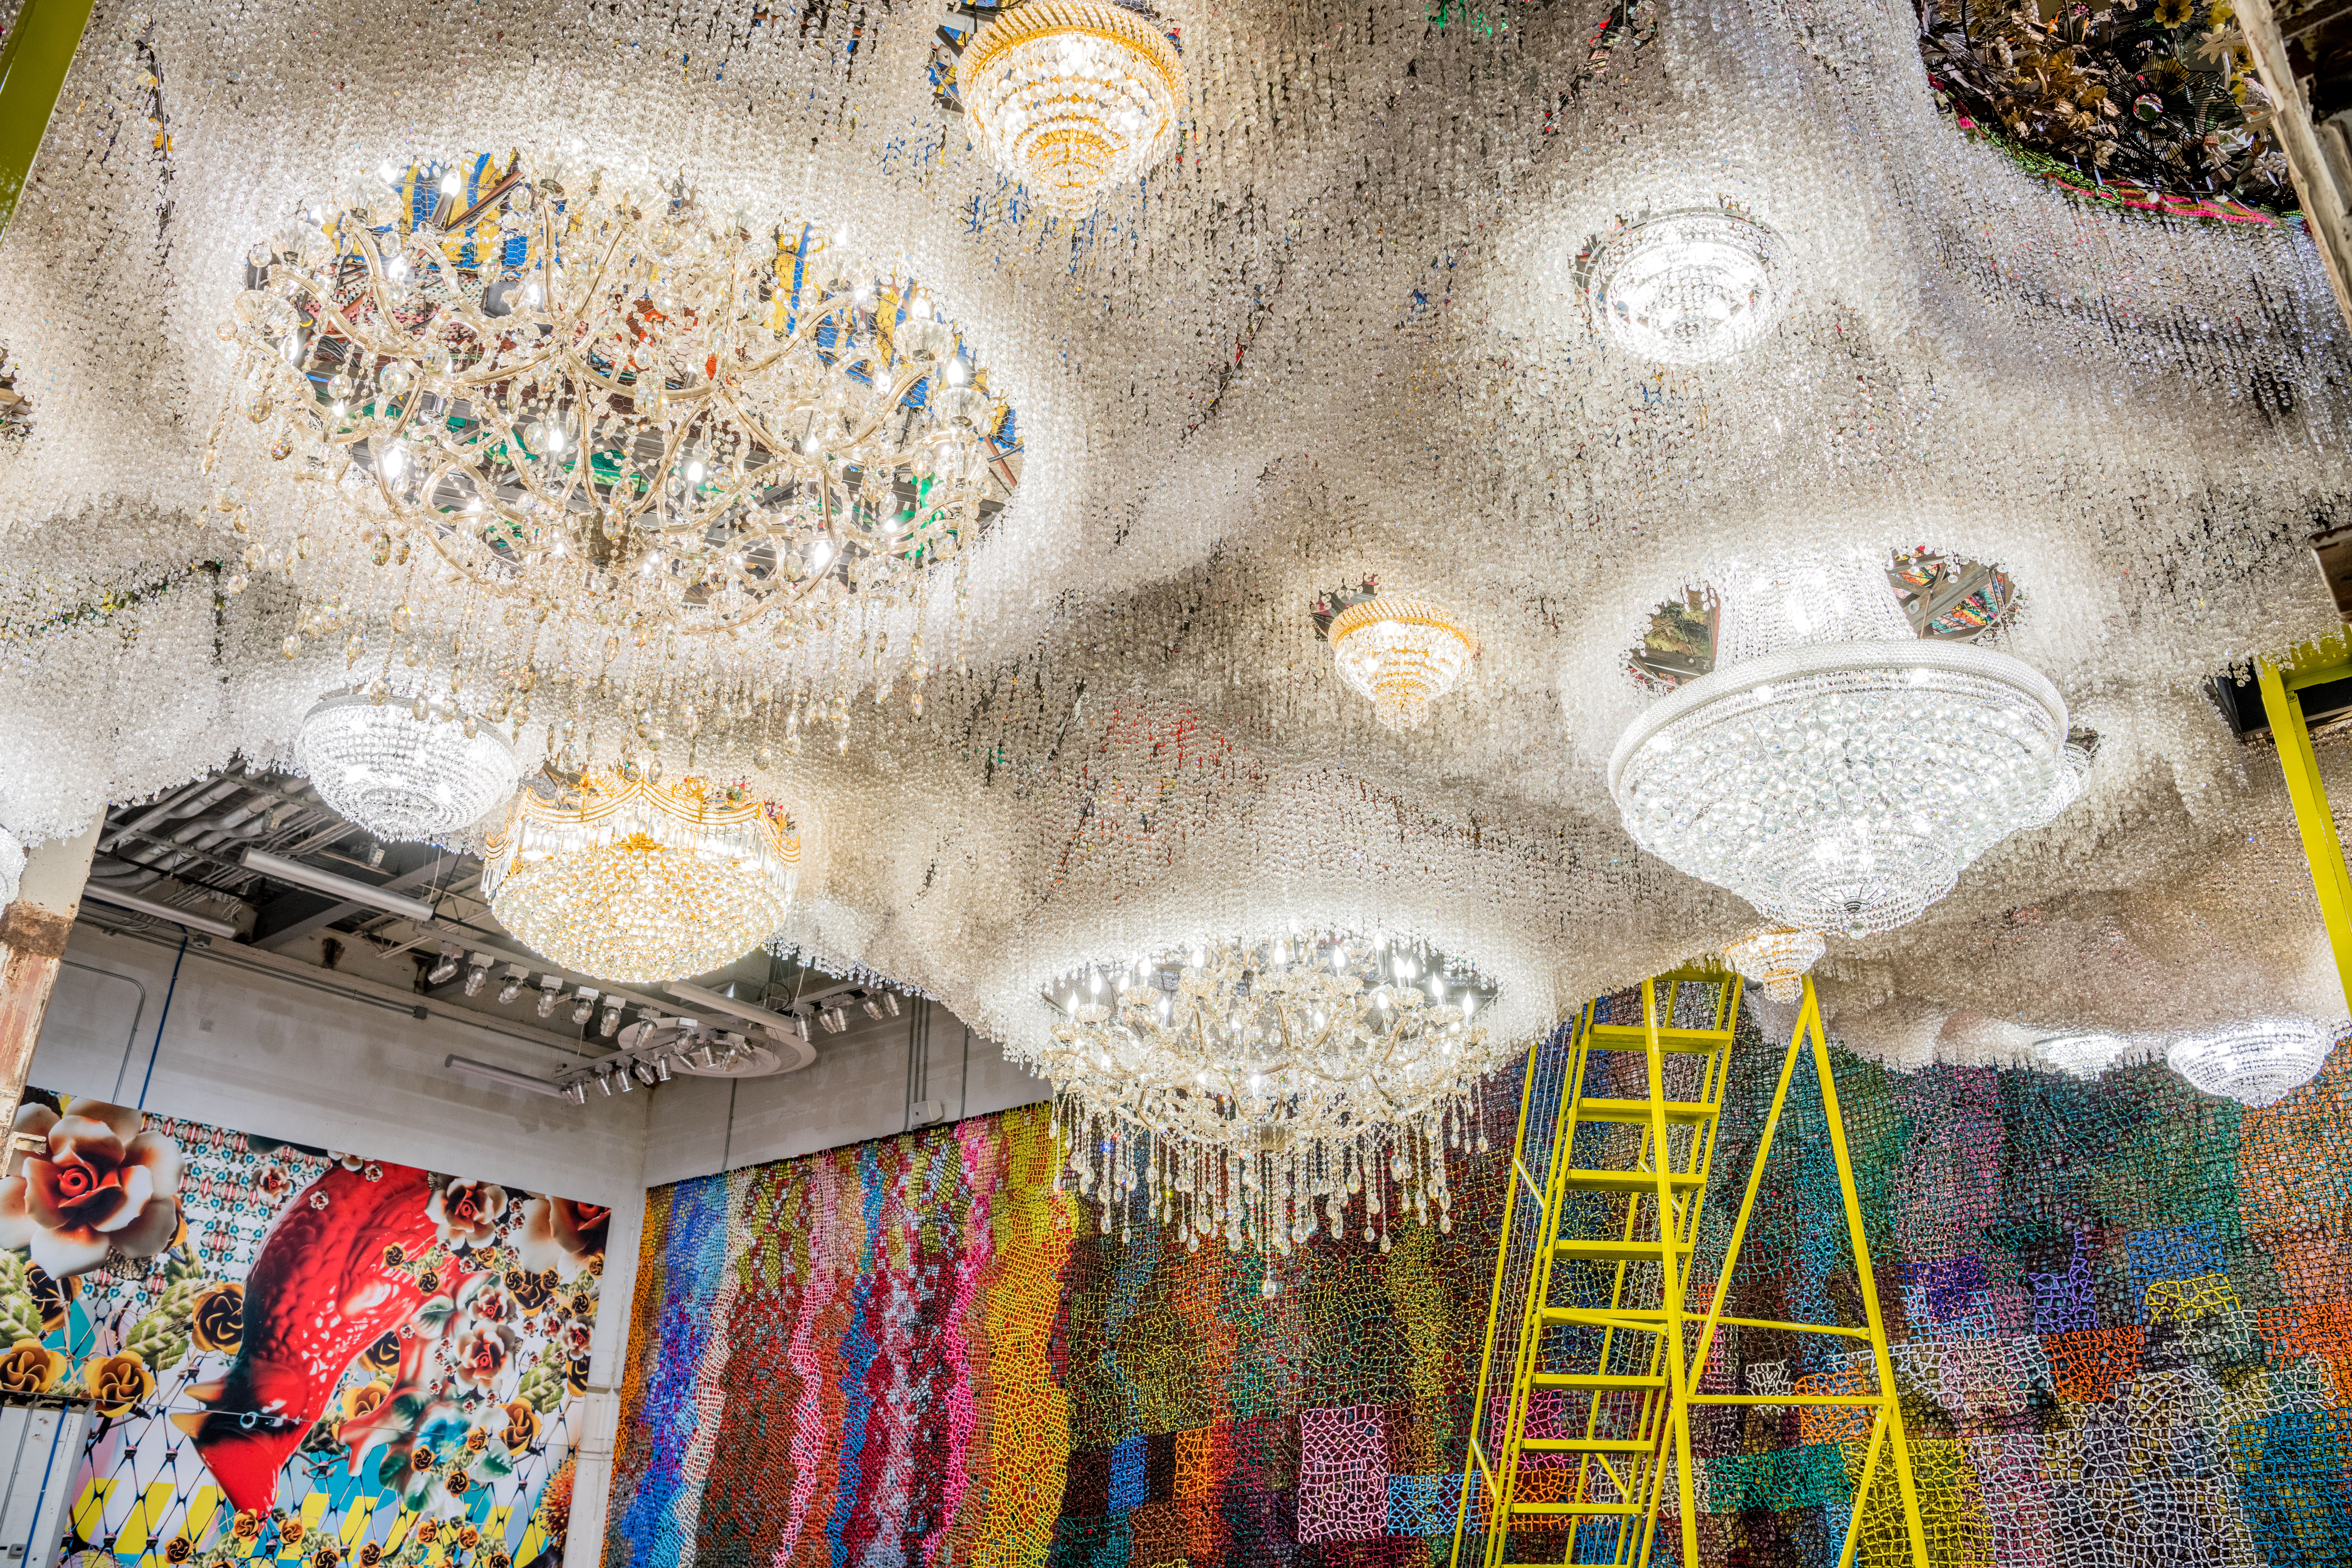 Crystal Cloudscape by artist Nick Cave